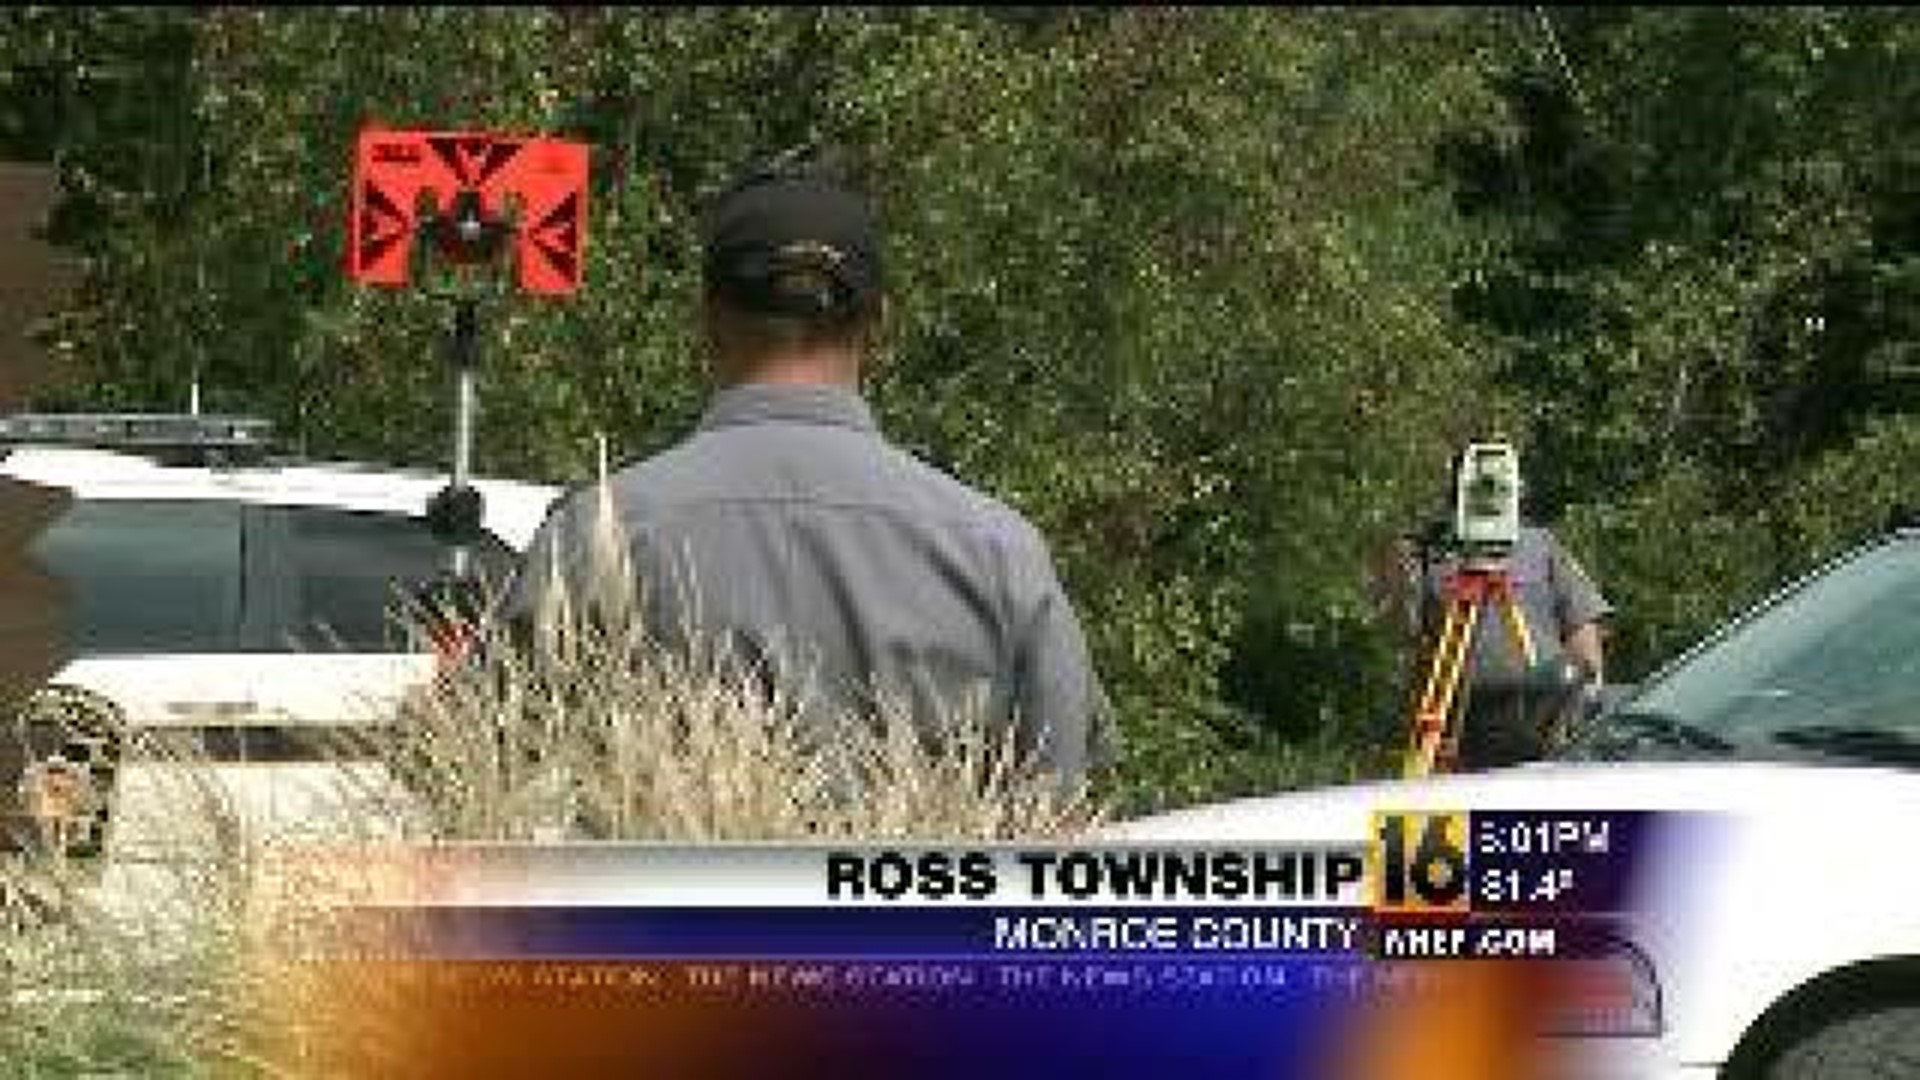 Investigations Continue at Ross Township